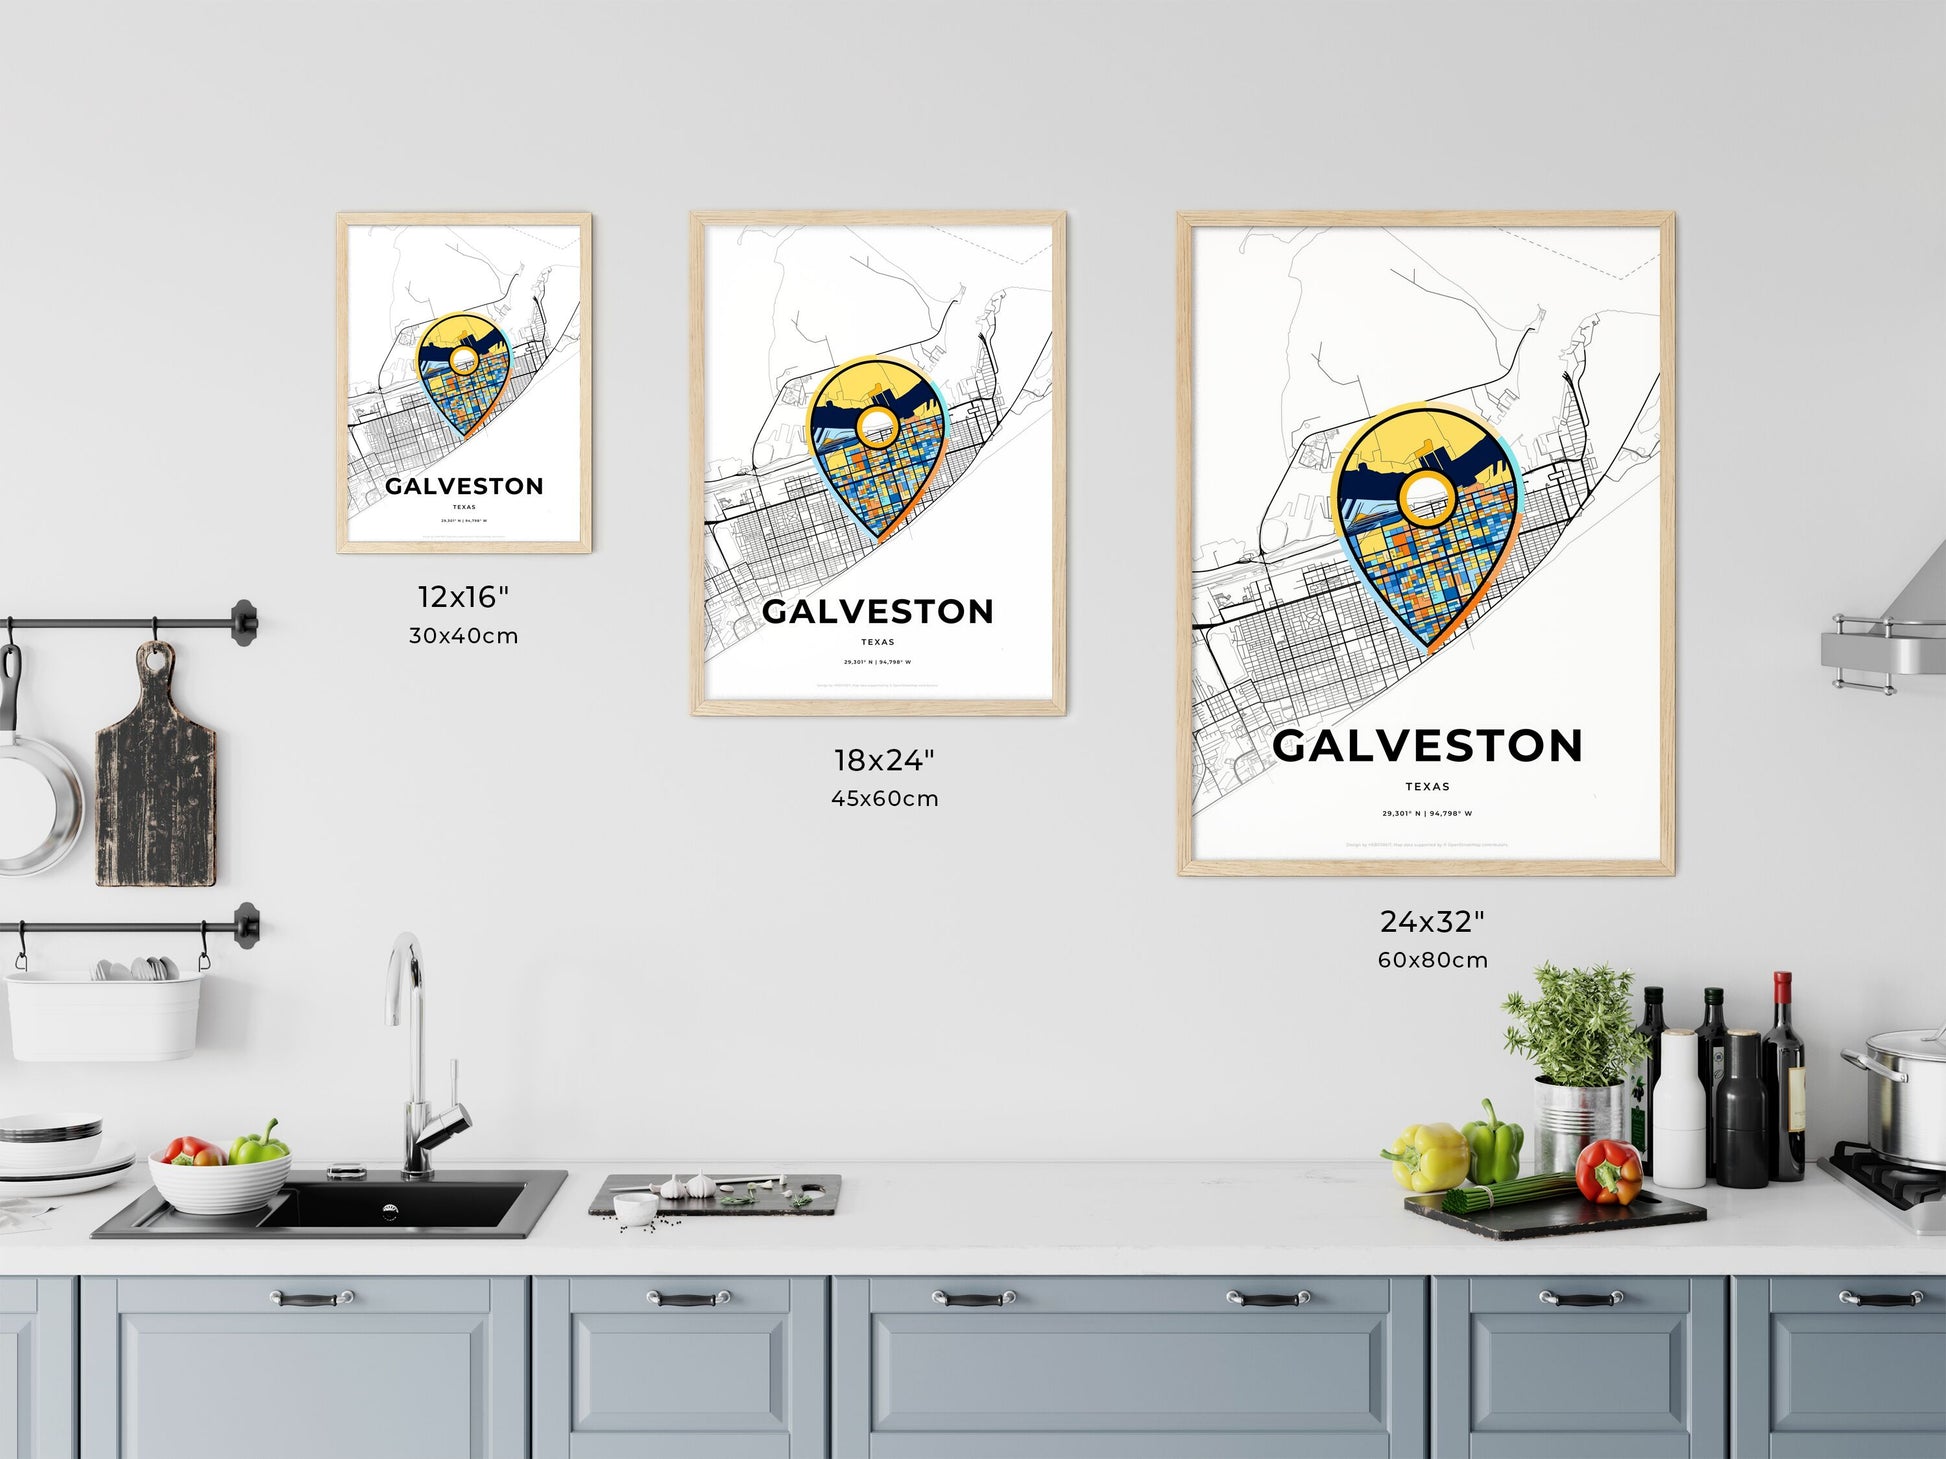 GALVESTON TEXAS minimal art map with a colorful icon. Where it all began, Couple map gift.